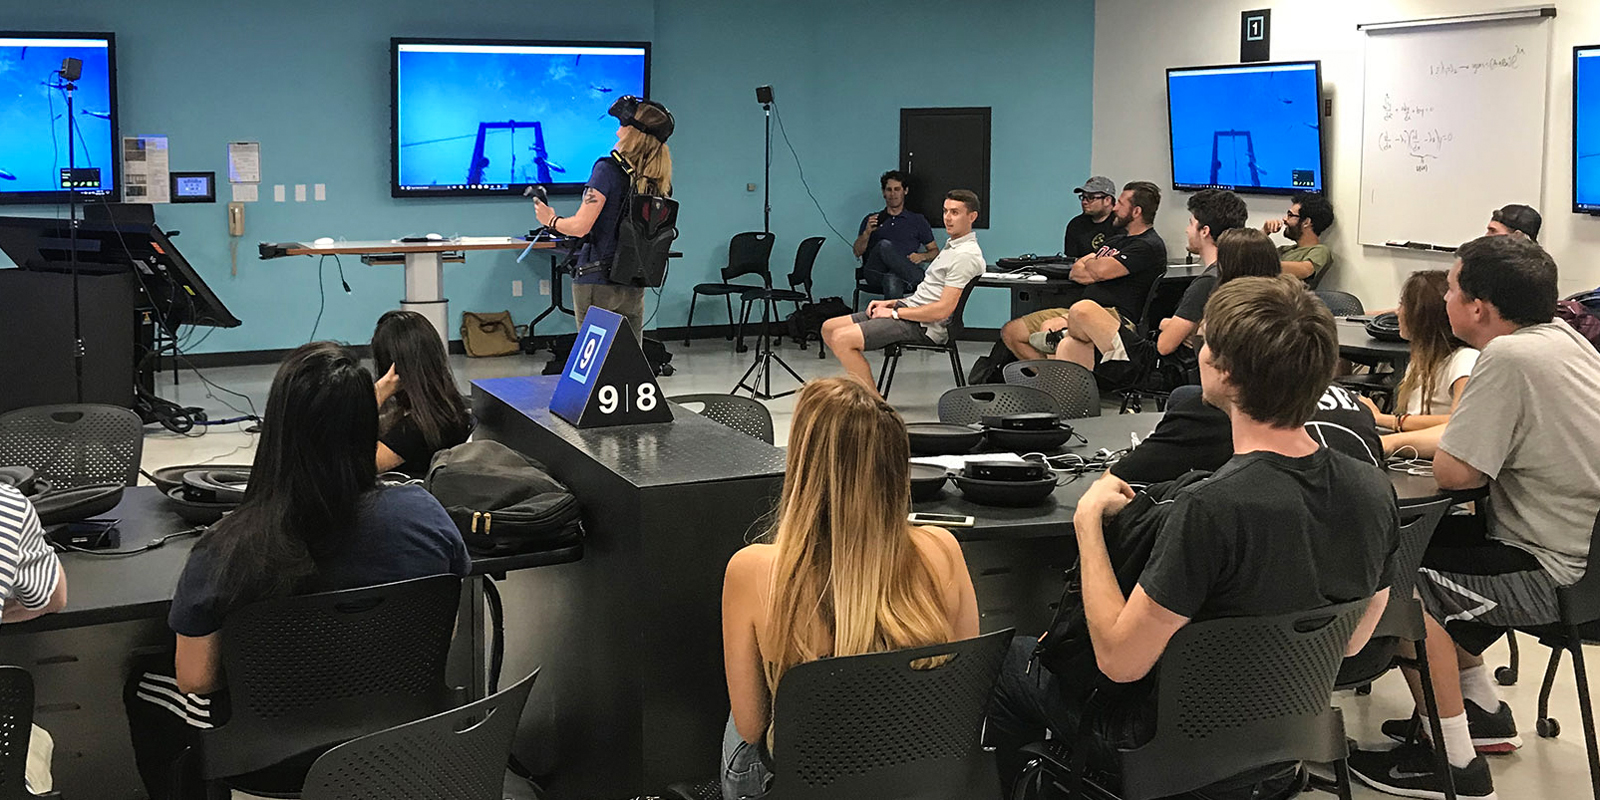 SDSU Instructor Linnea Zeiner mirrors her headset display during a class in one of the campus’s Learning Research Studio classrooms (photo predates COVID-19).